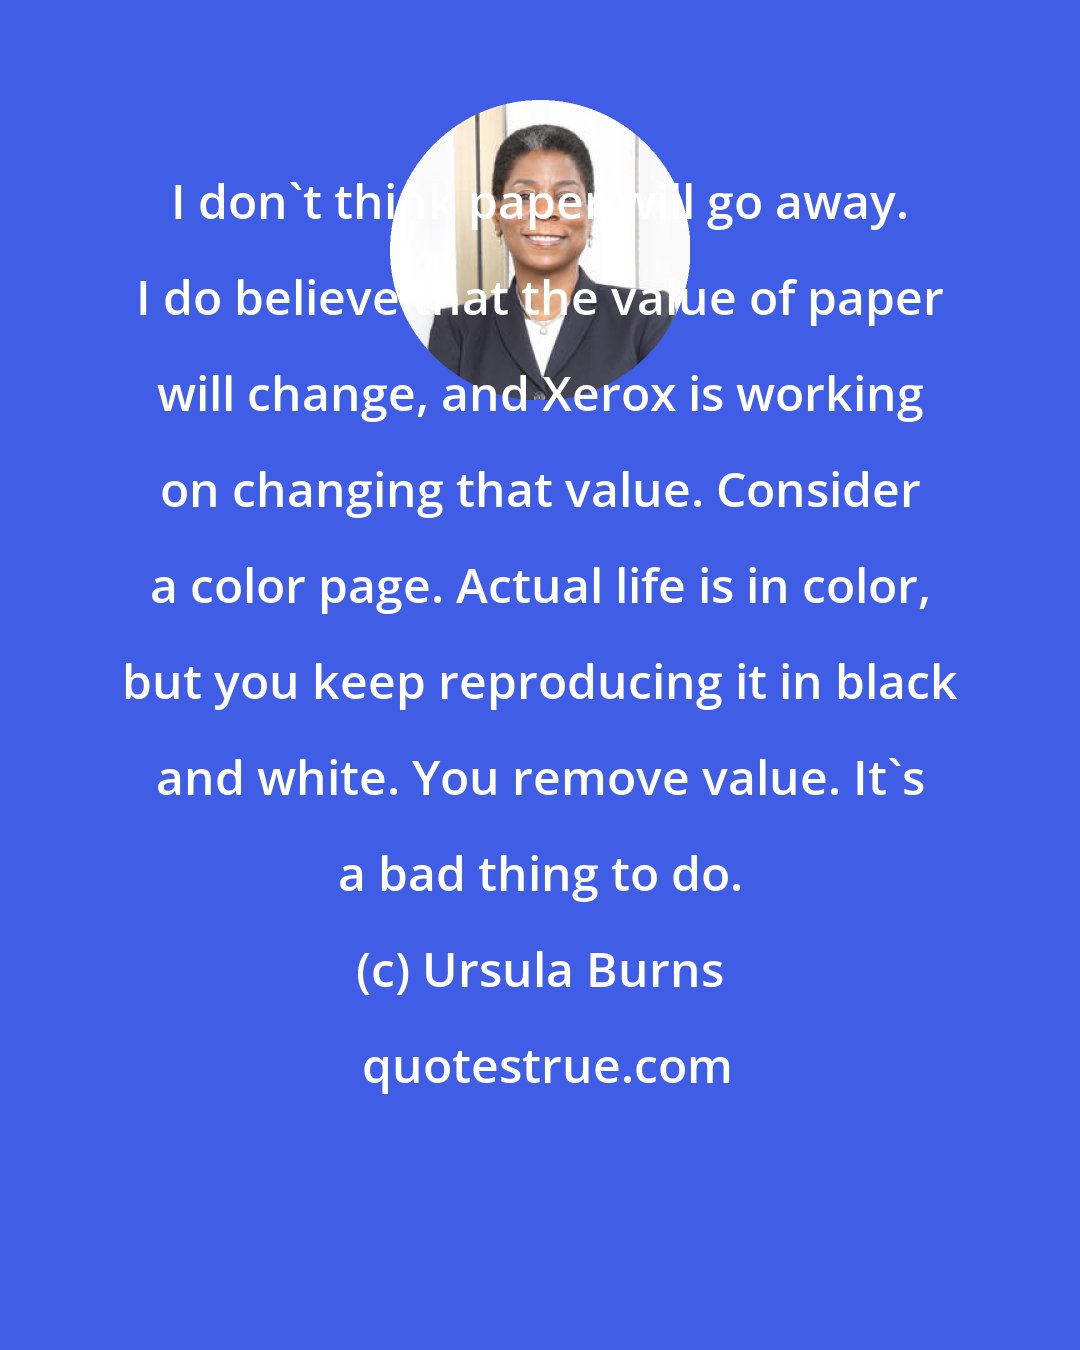 Ursula Burns: I don't think paper will go away. I do believe that the value of paper will change, and Xerox is working on changing that value. Consider a color page. Actual life is in color, but you keep reproducing it in black and white. You remove value. It's a bad thing to do.